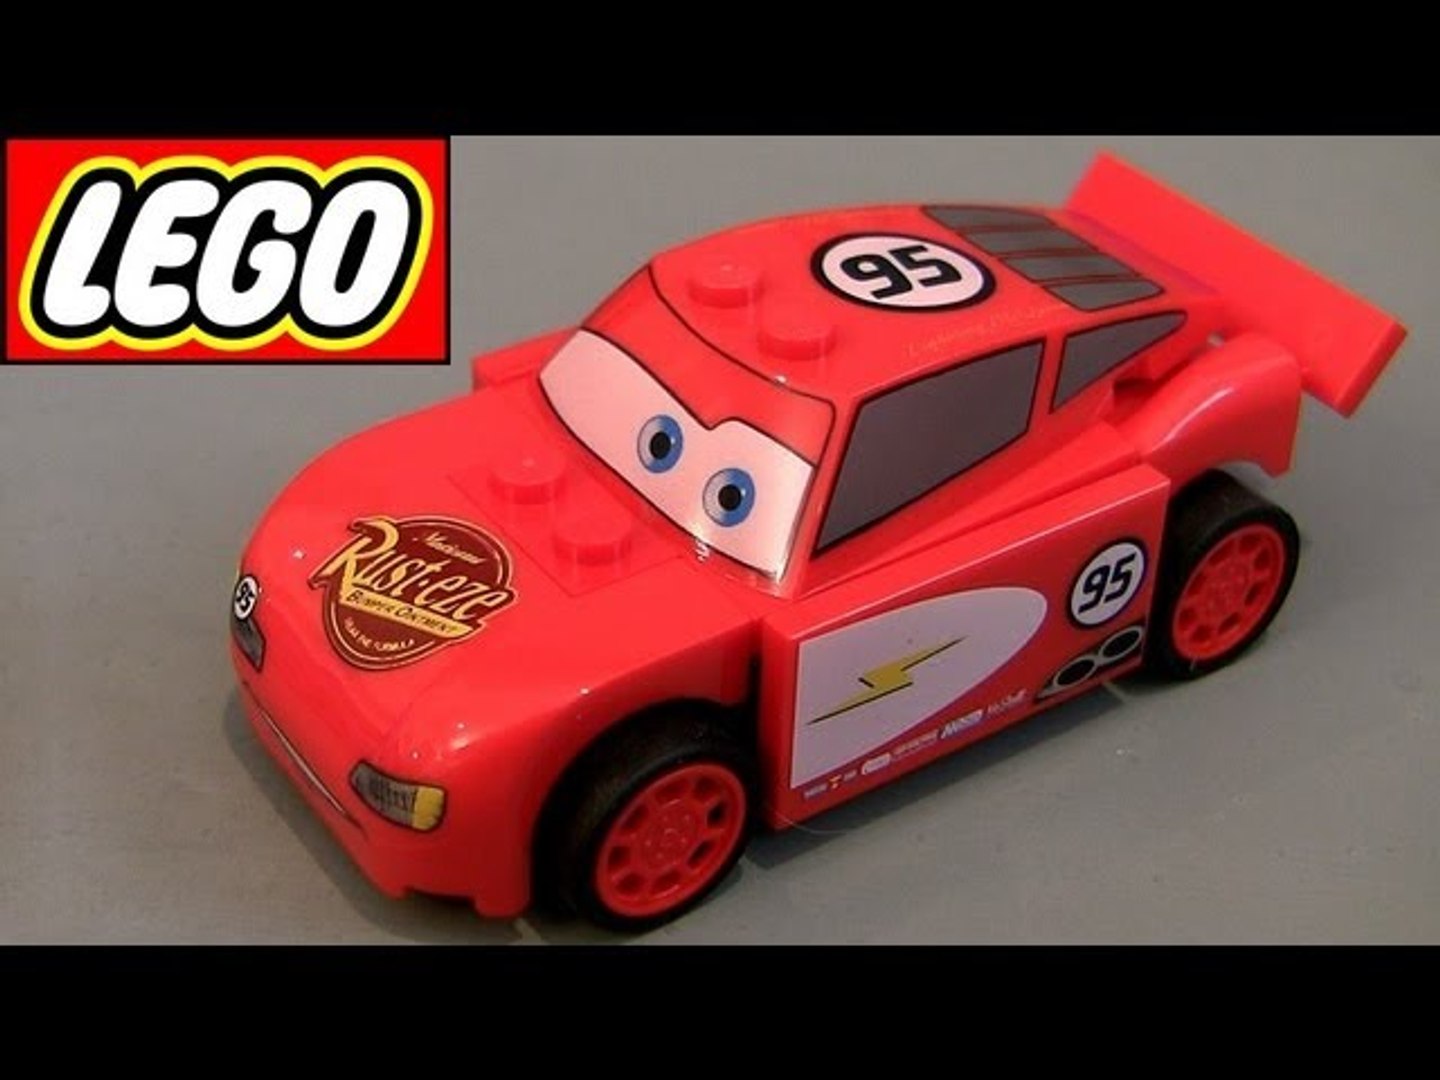 Lego Cars 2 Radiator Springs 8200 toy review how-to build Disney Pixar toys - video Dailymotion